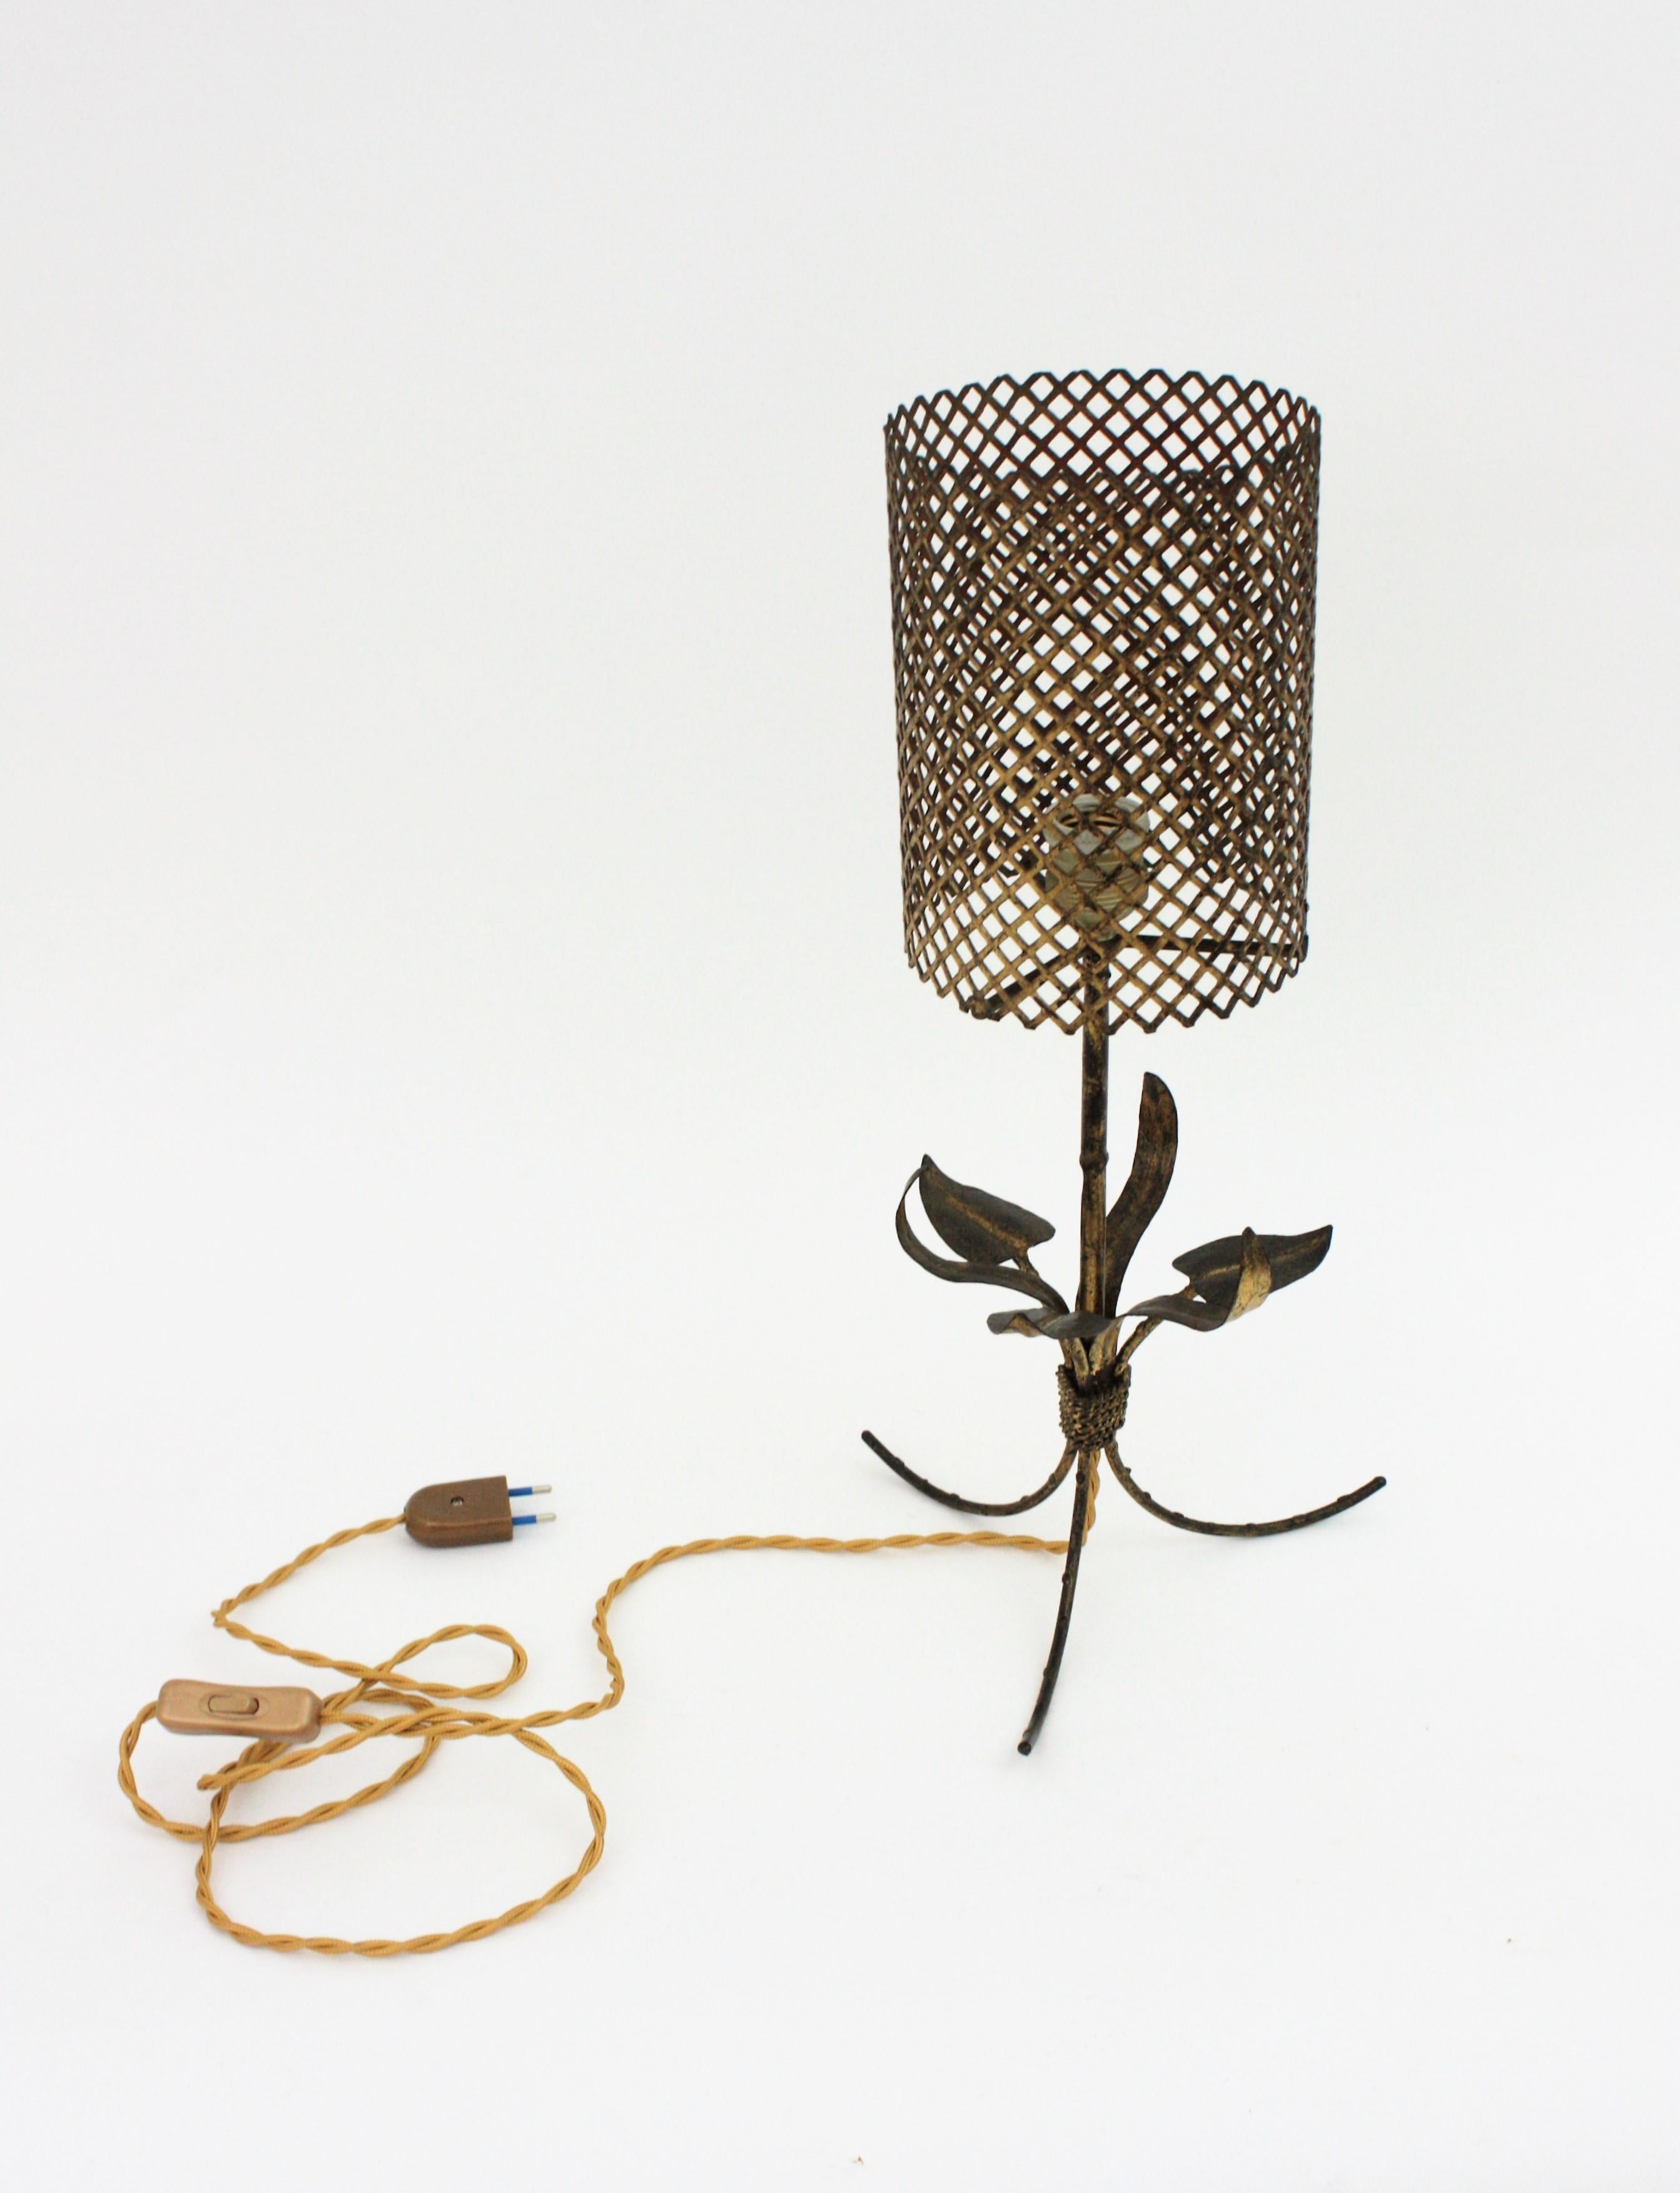 French Faux Bamboo Foliage Tripod Table Lamp in Gilt Metal, 1940s For Sale 9